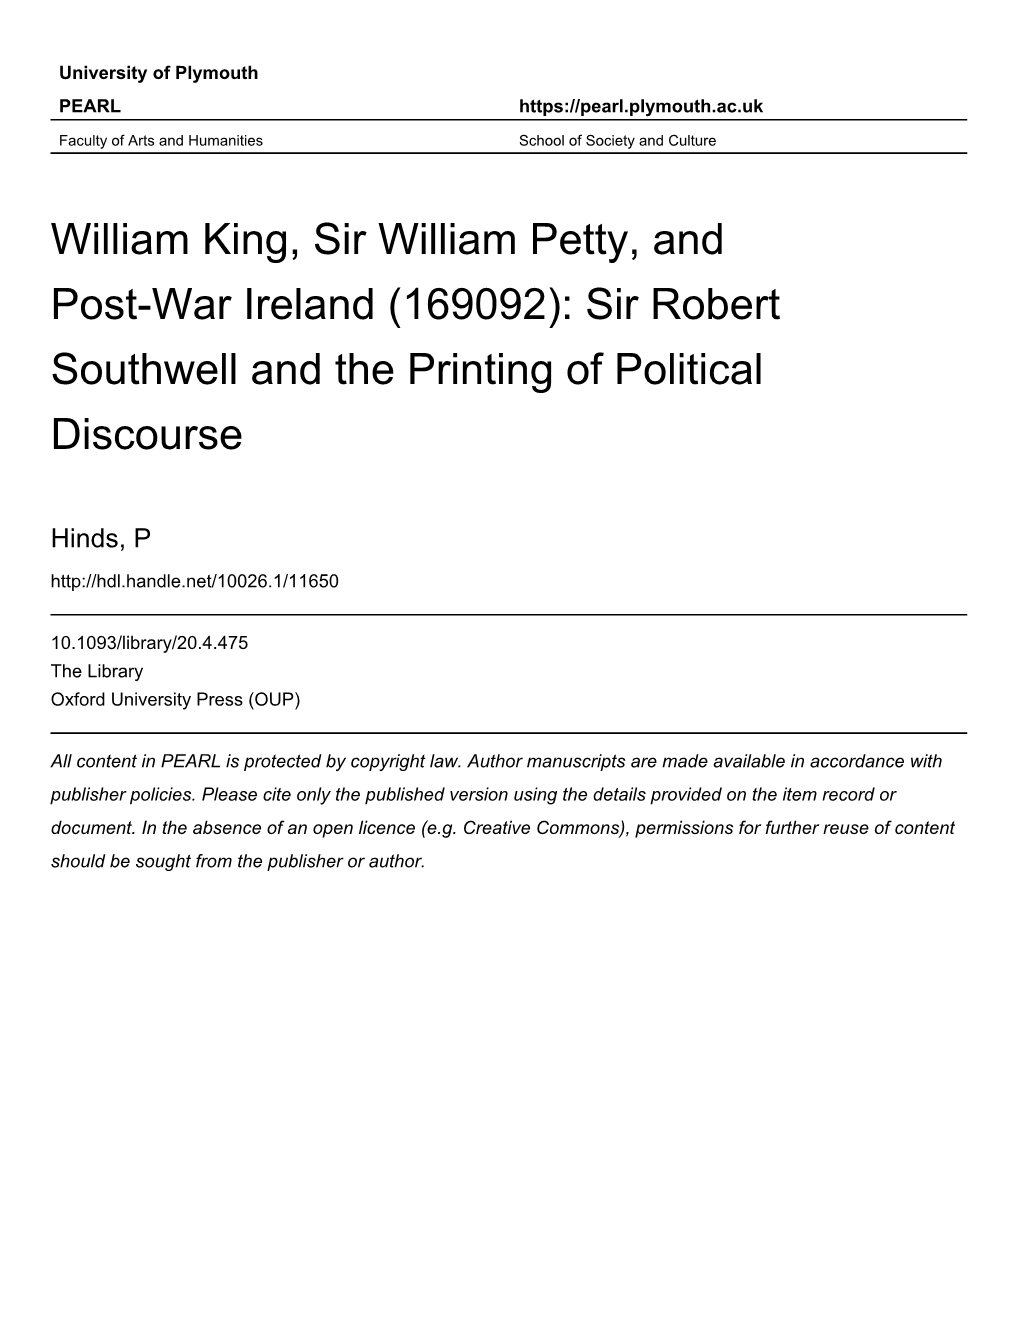 William King, Sir William Petty and Post-War Ireland (1690-92): Sir Robert Southwell and the Printing of Political Discours